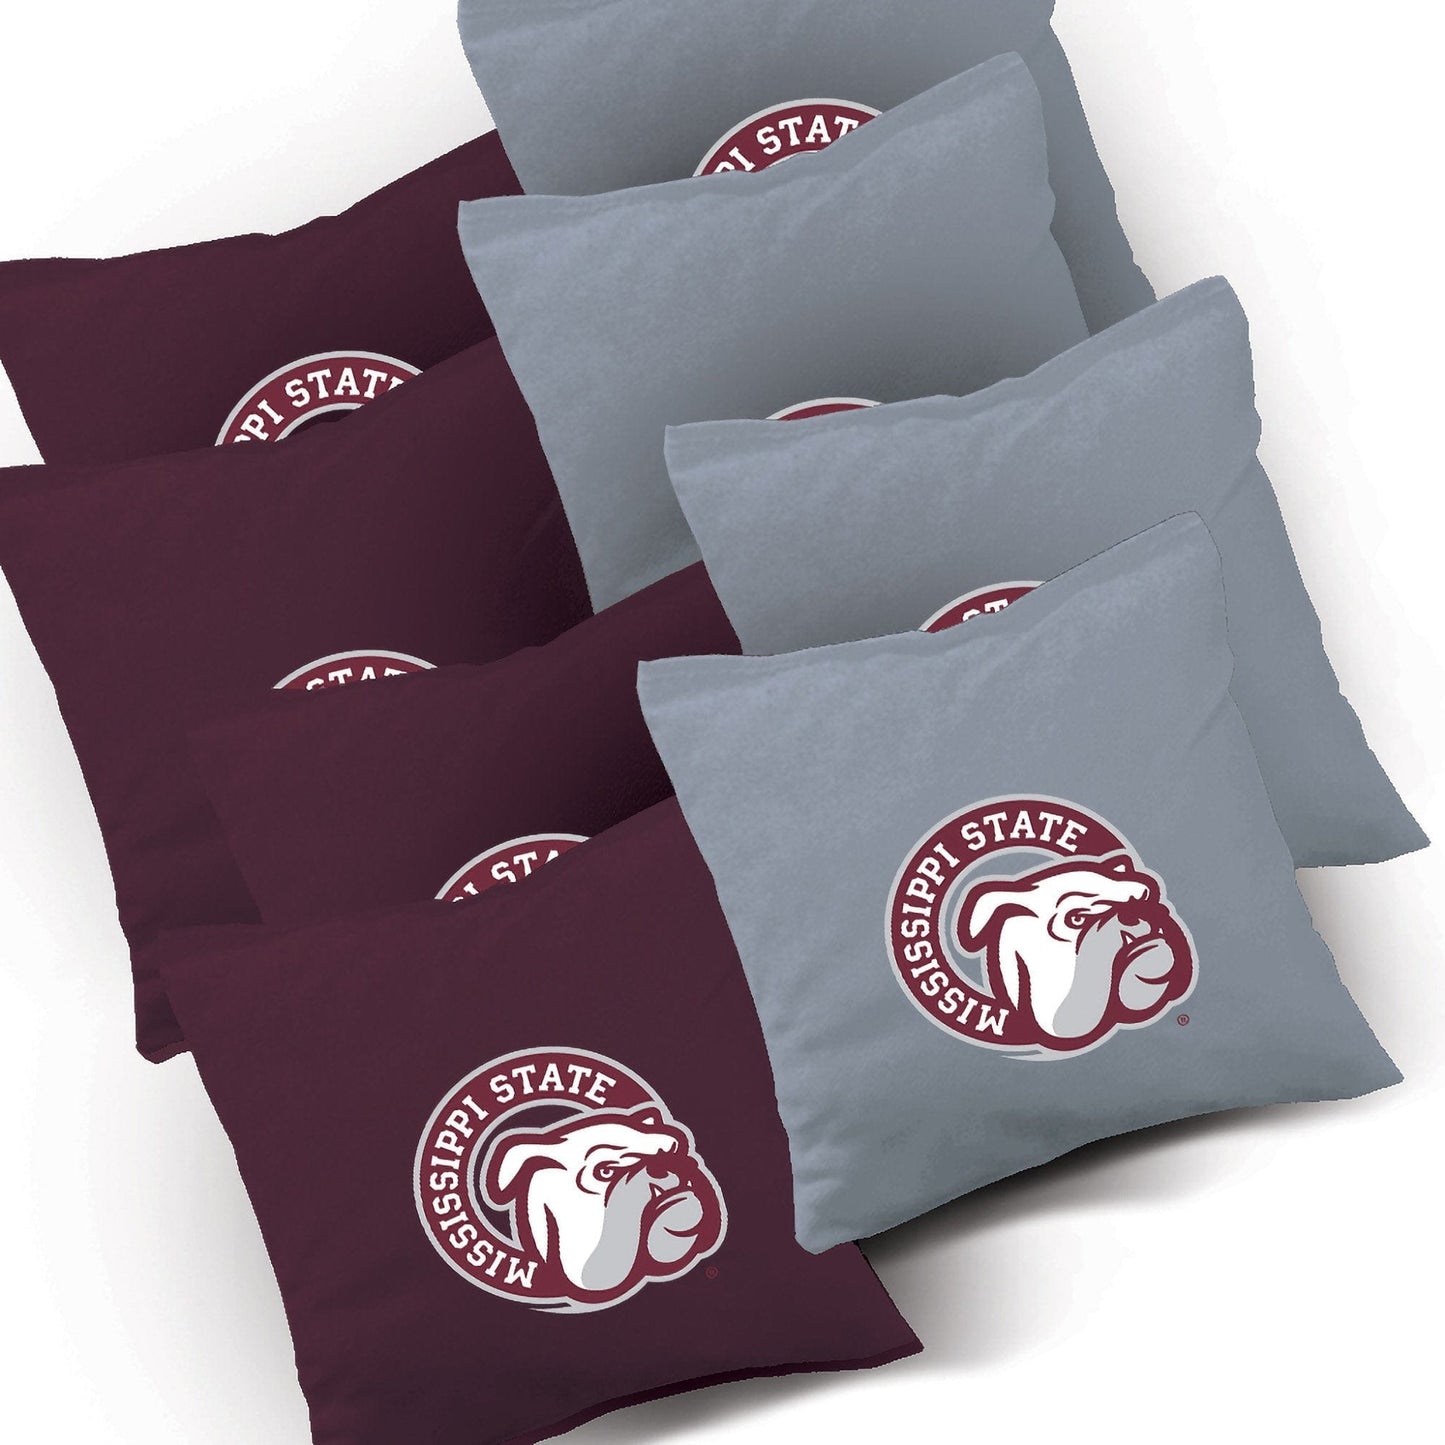 Mississippi State Stained Striped team logo bags